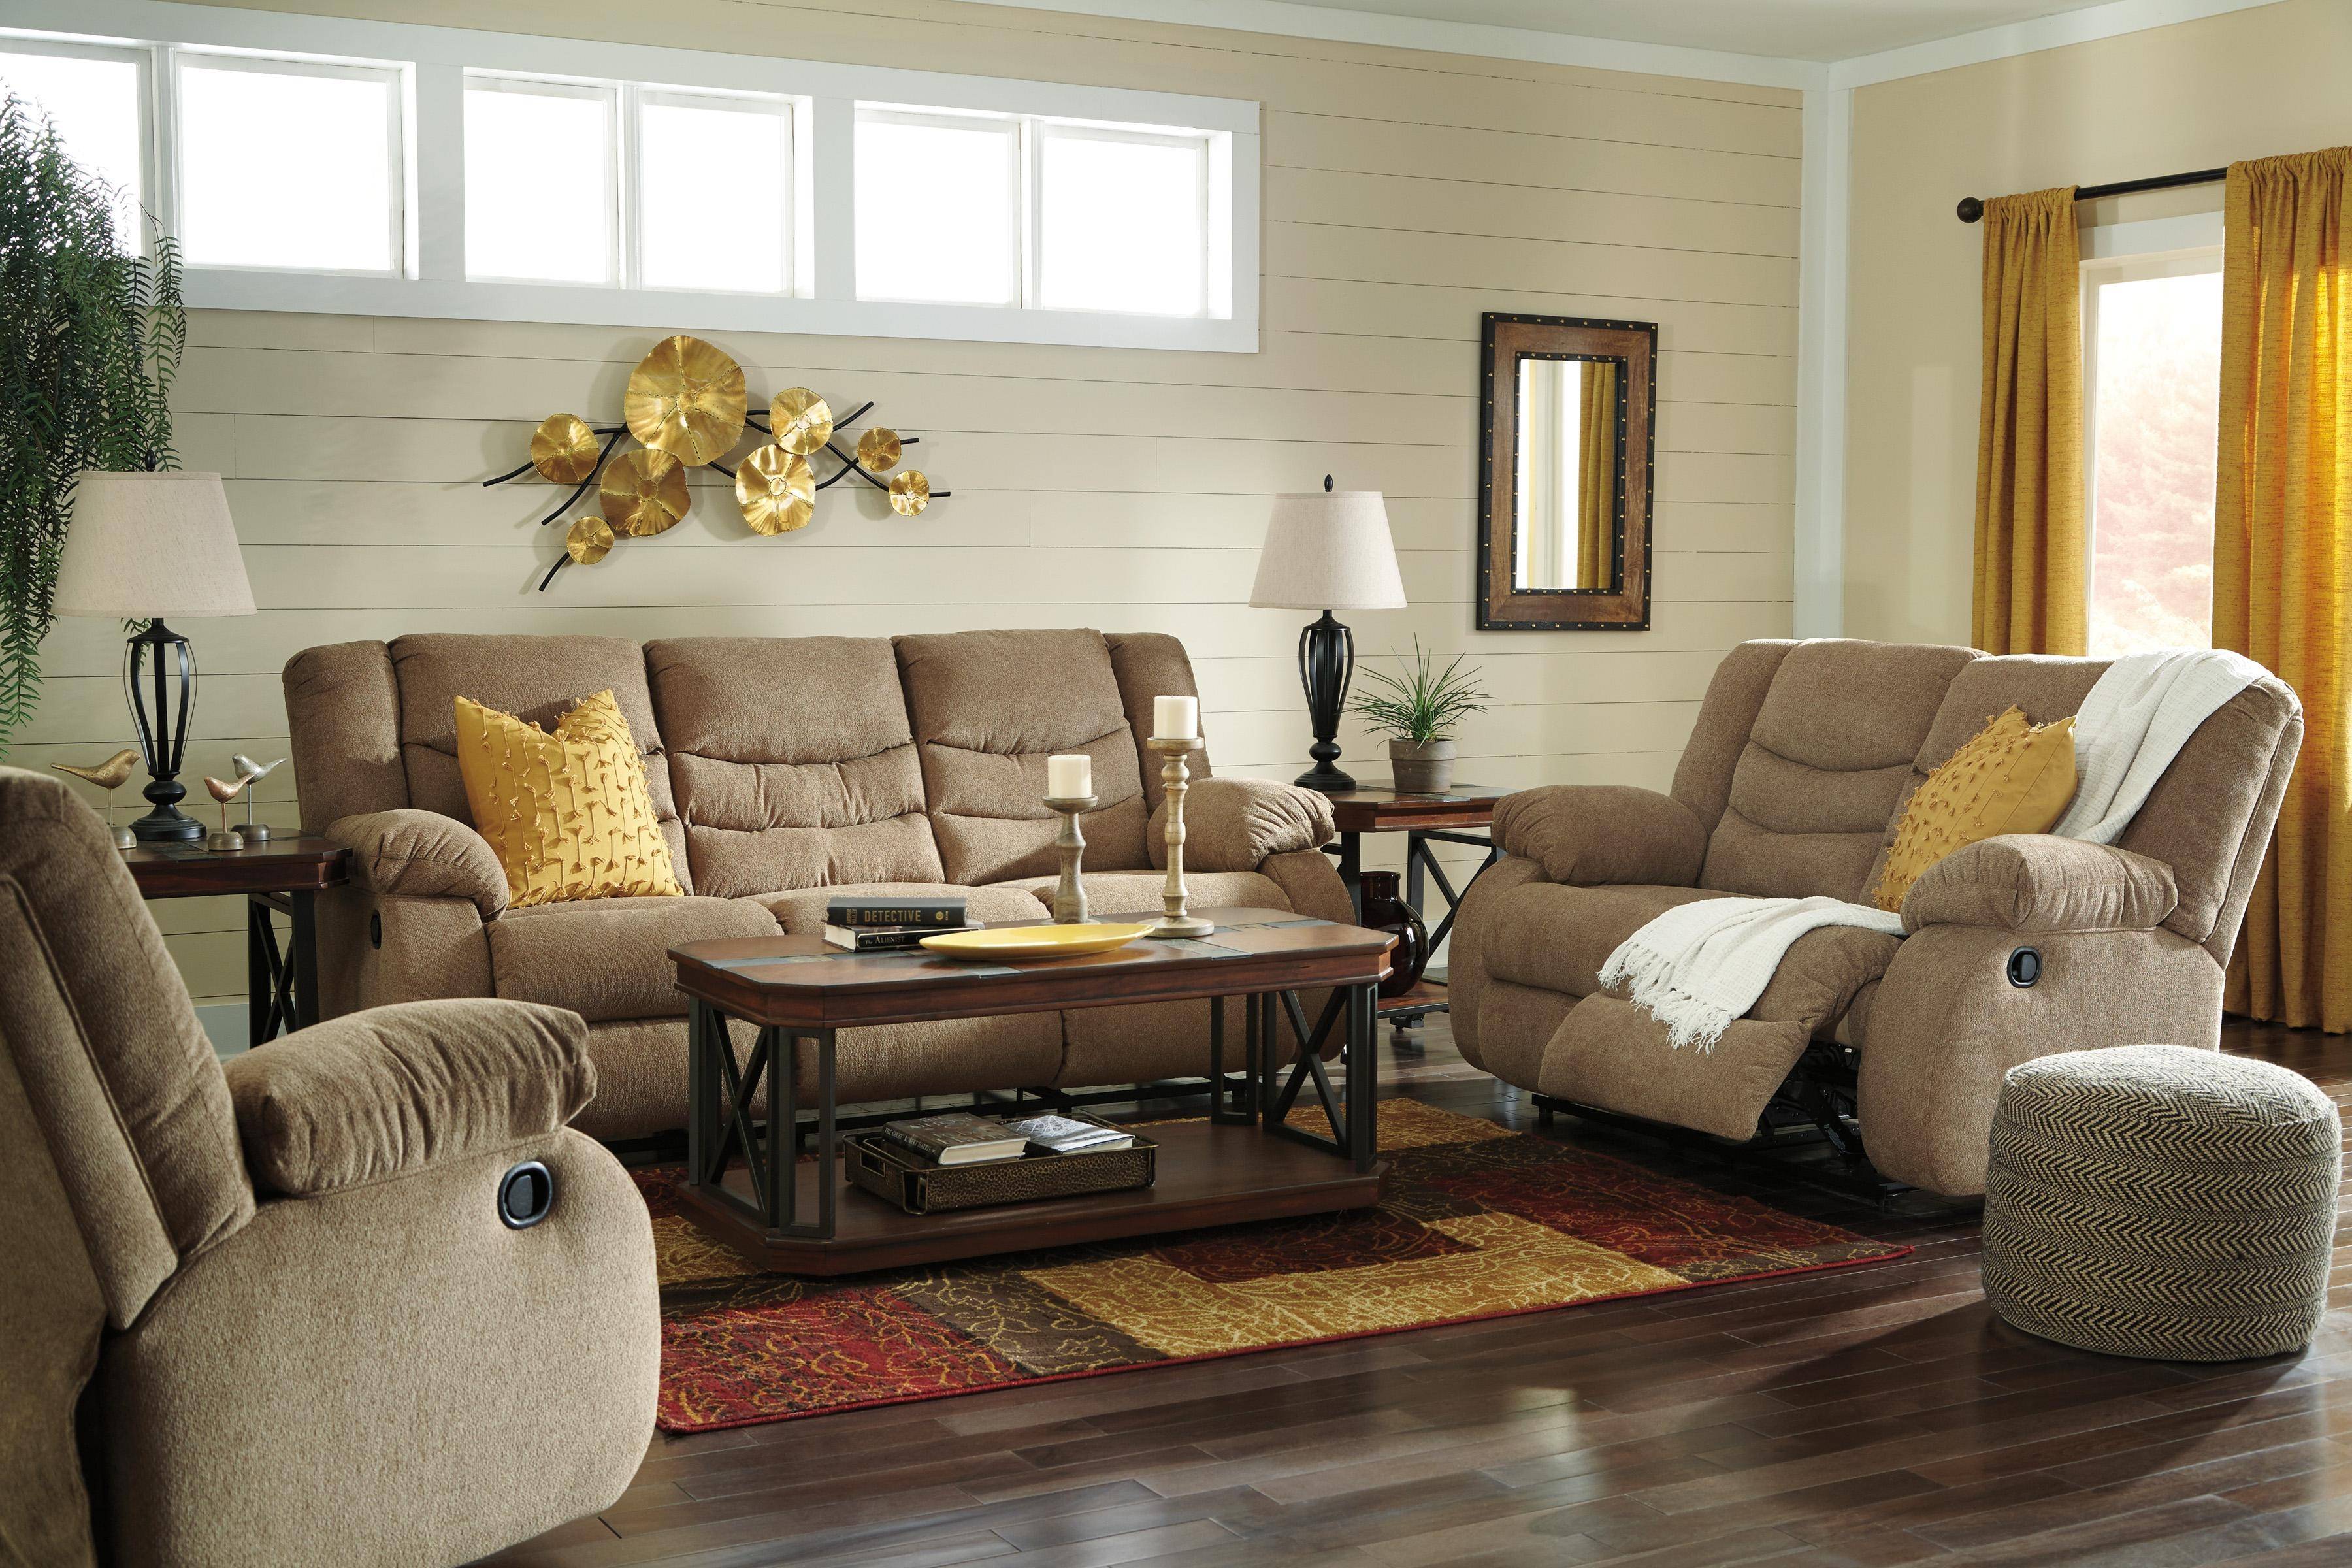 Creatice Ashley Furniture Living Room Sets Prices for Small Space